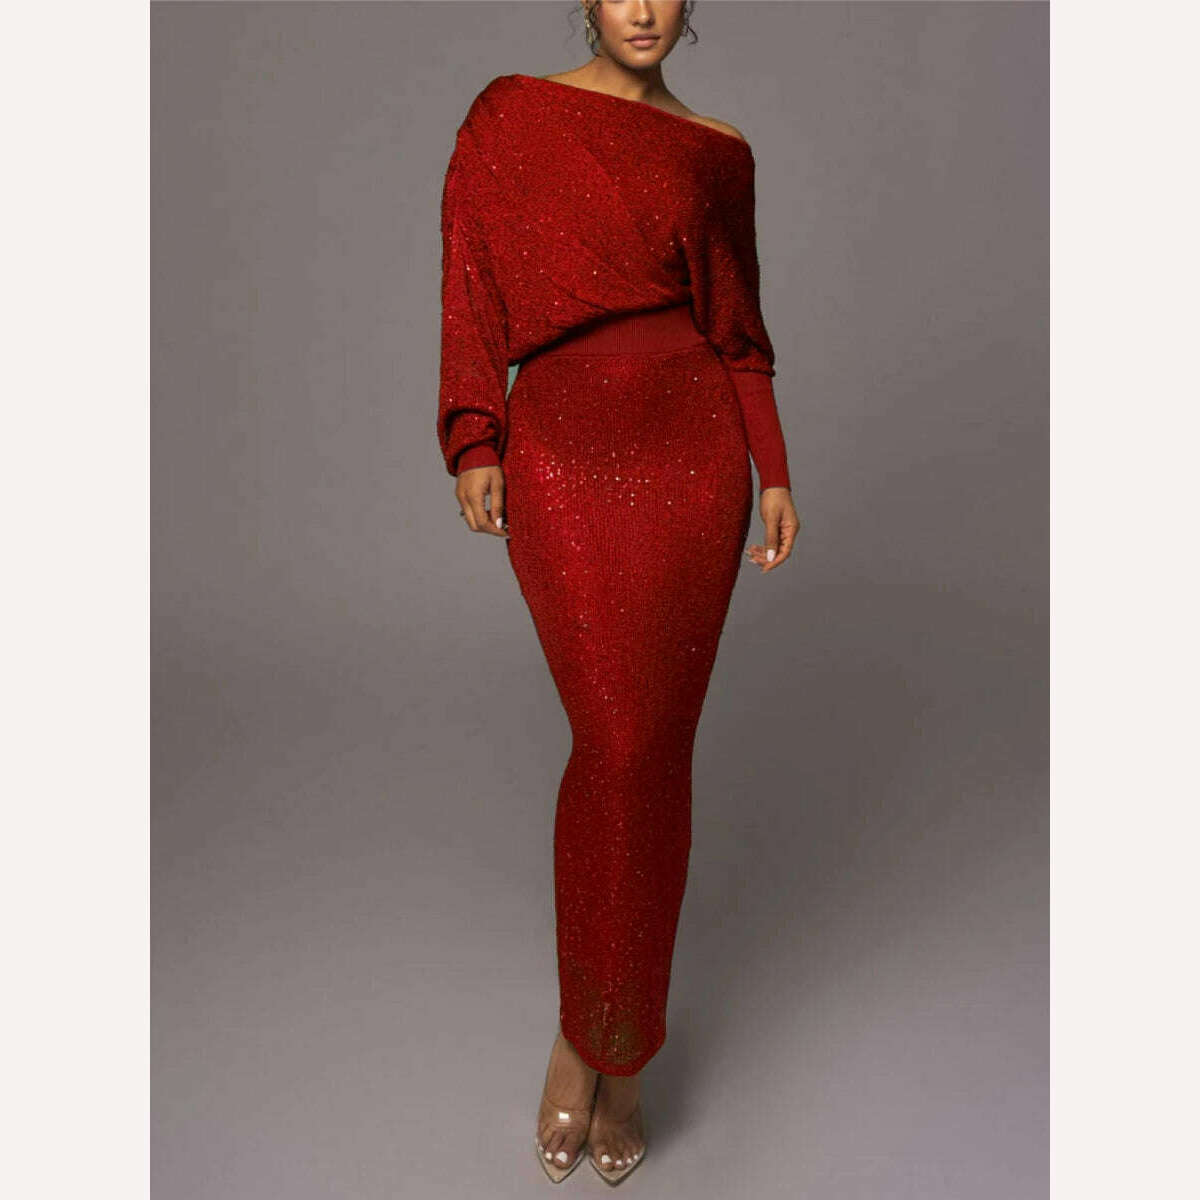 KIMLUD, Mikydely Autumn New Elegant Off The Shoulder Knitted  Dress Woman Long sleeve Festive Dress, red / S, KIMLUD Womens Clothes